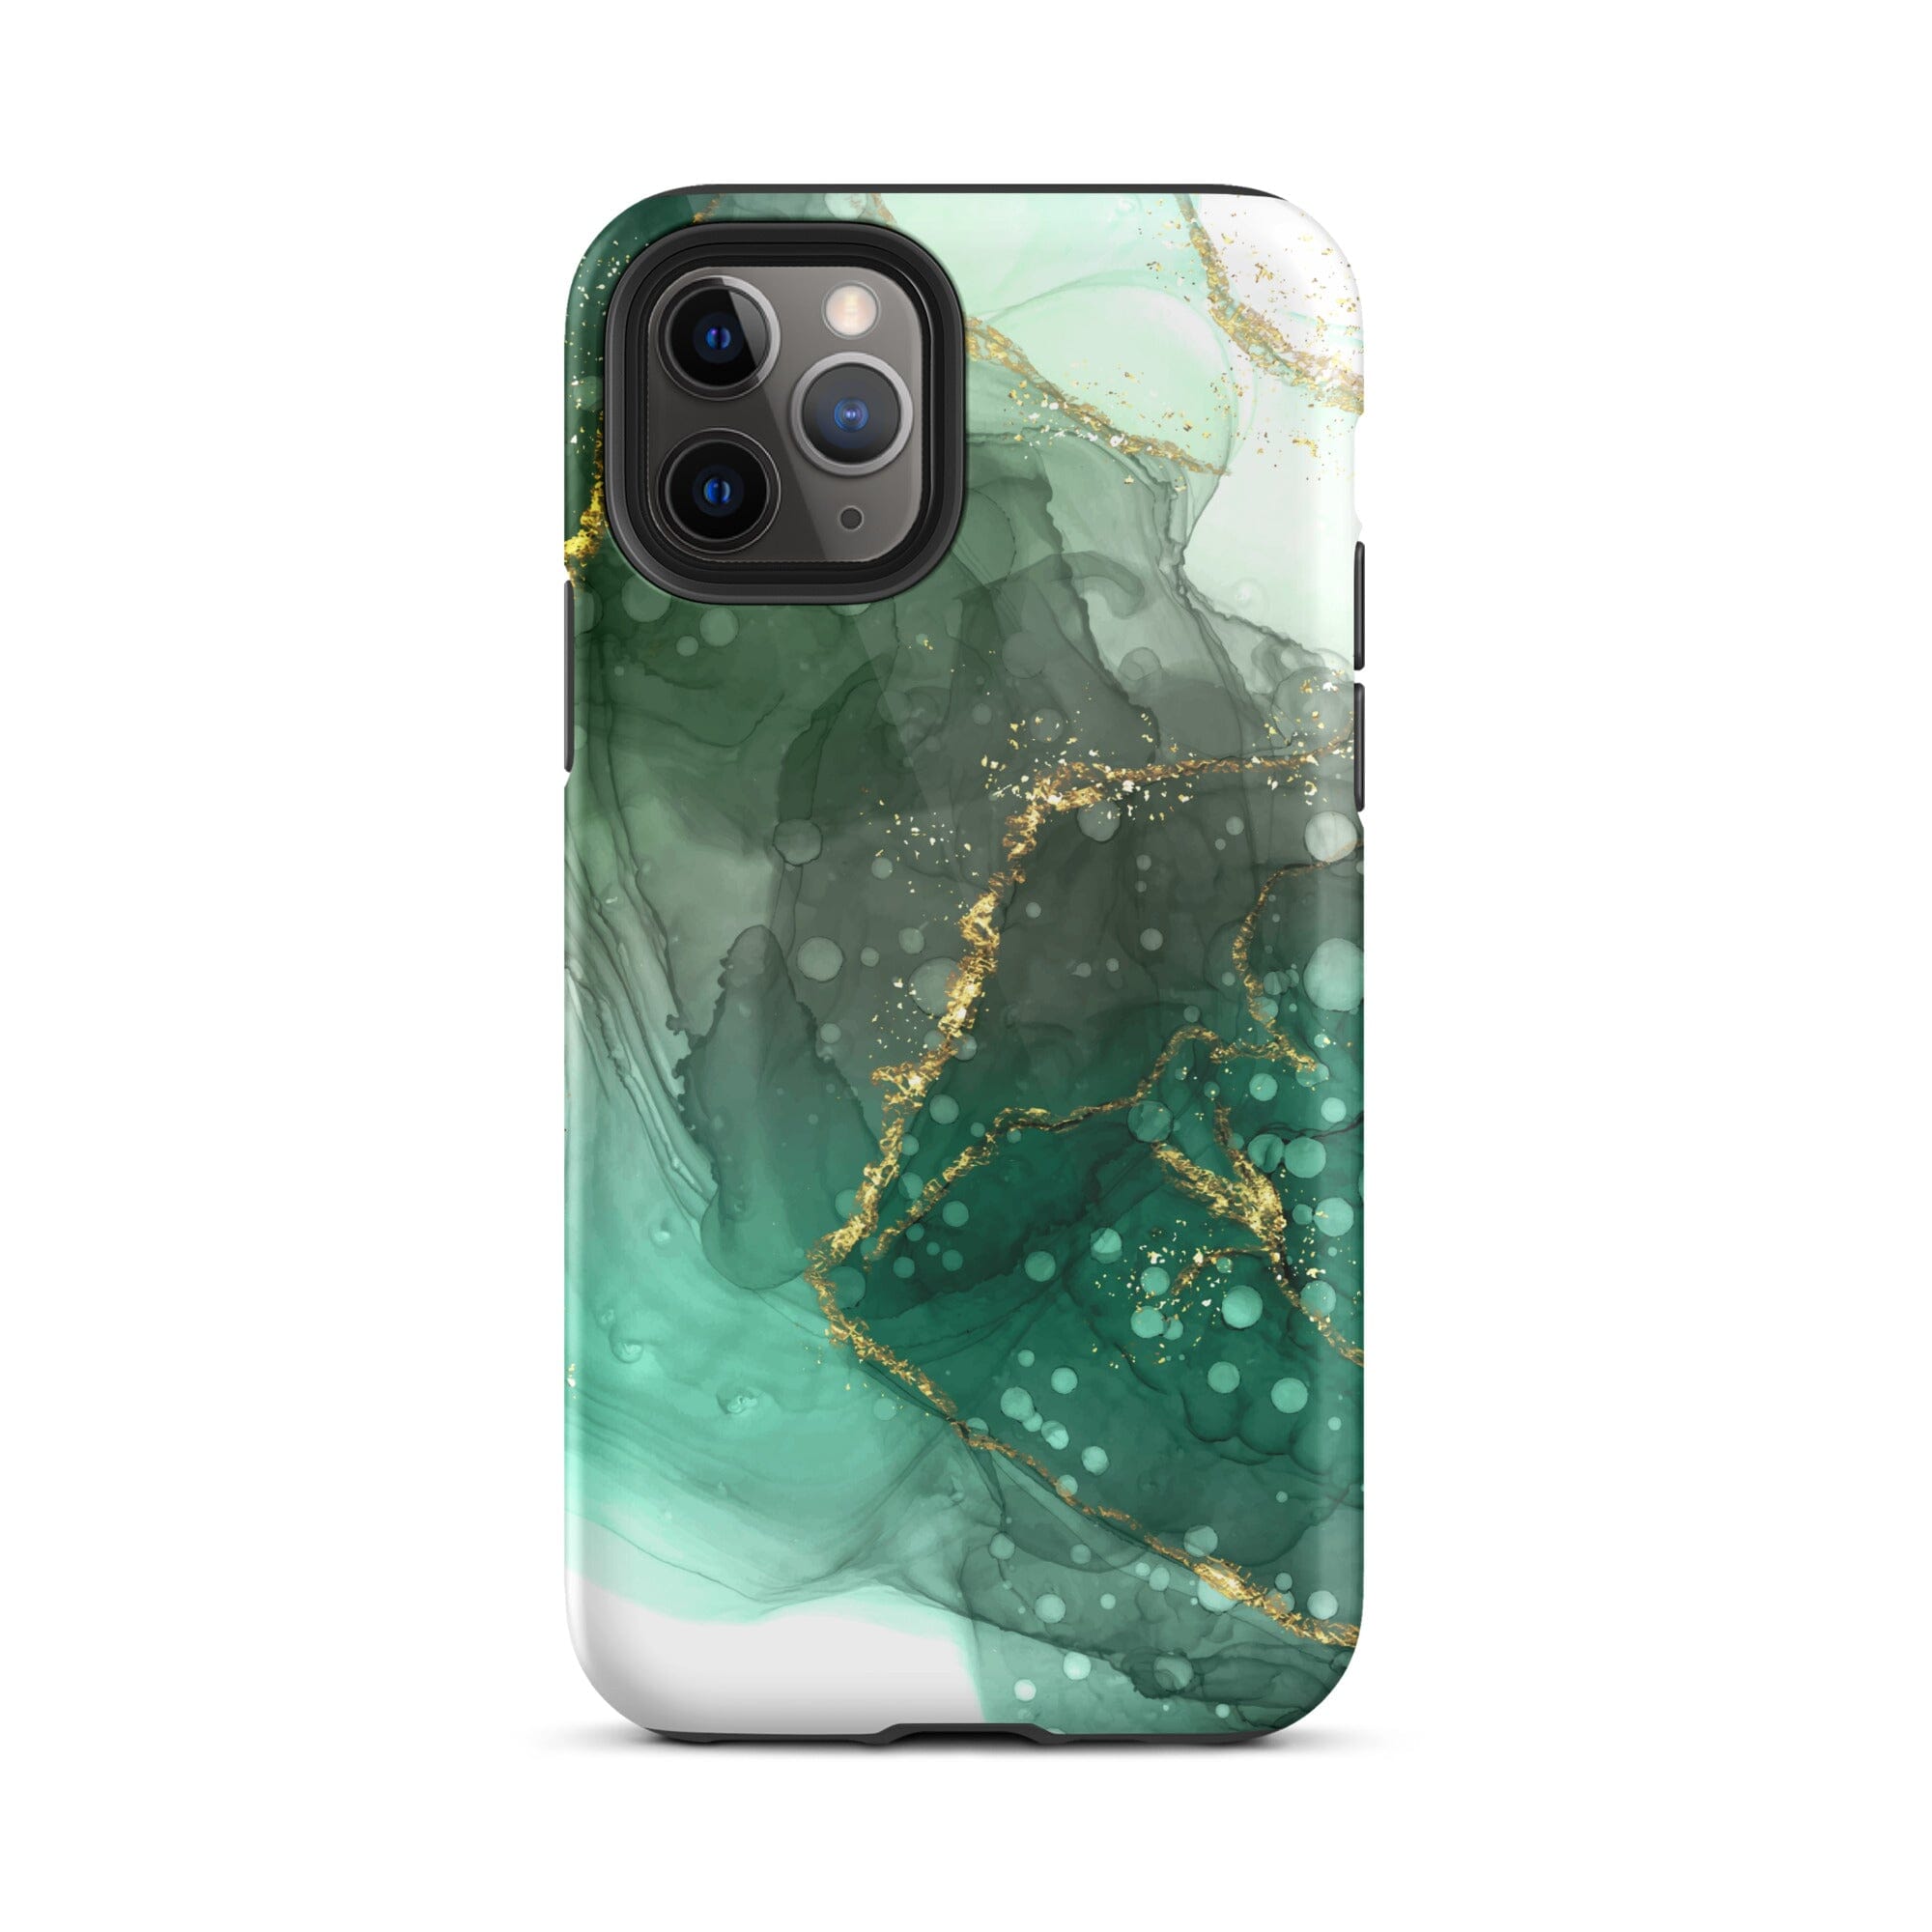 Jade Green Marble iPhone Case - KBB Exclusive Knitted Belle Boutique iPhone 11 